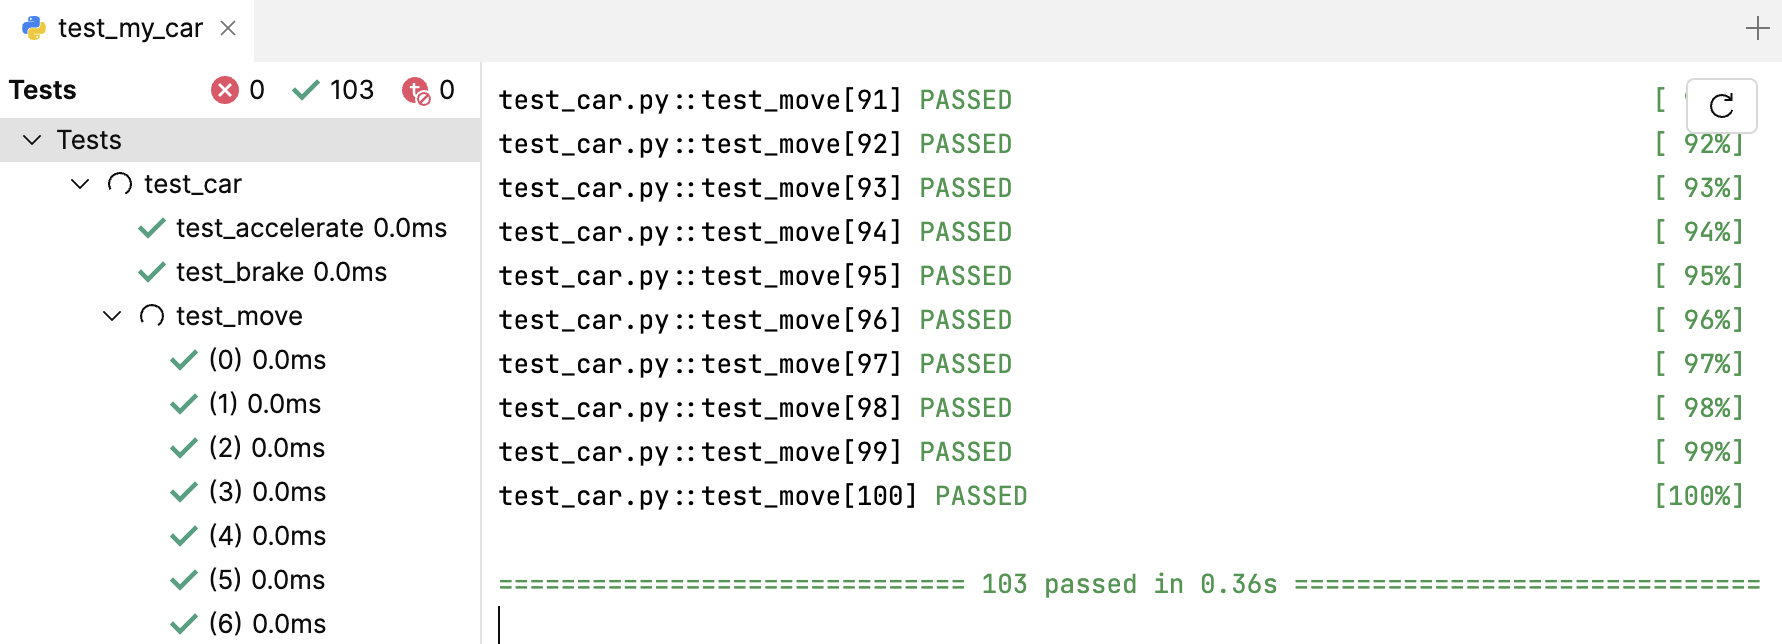 Parametrized tests passed